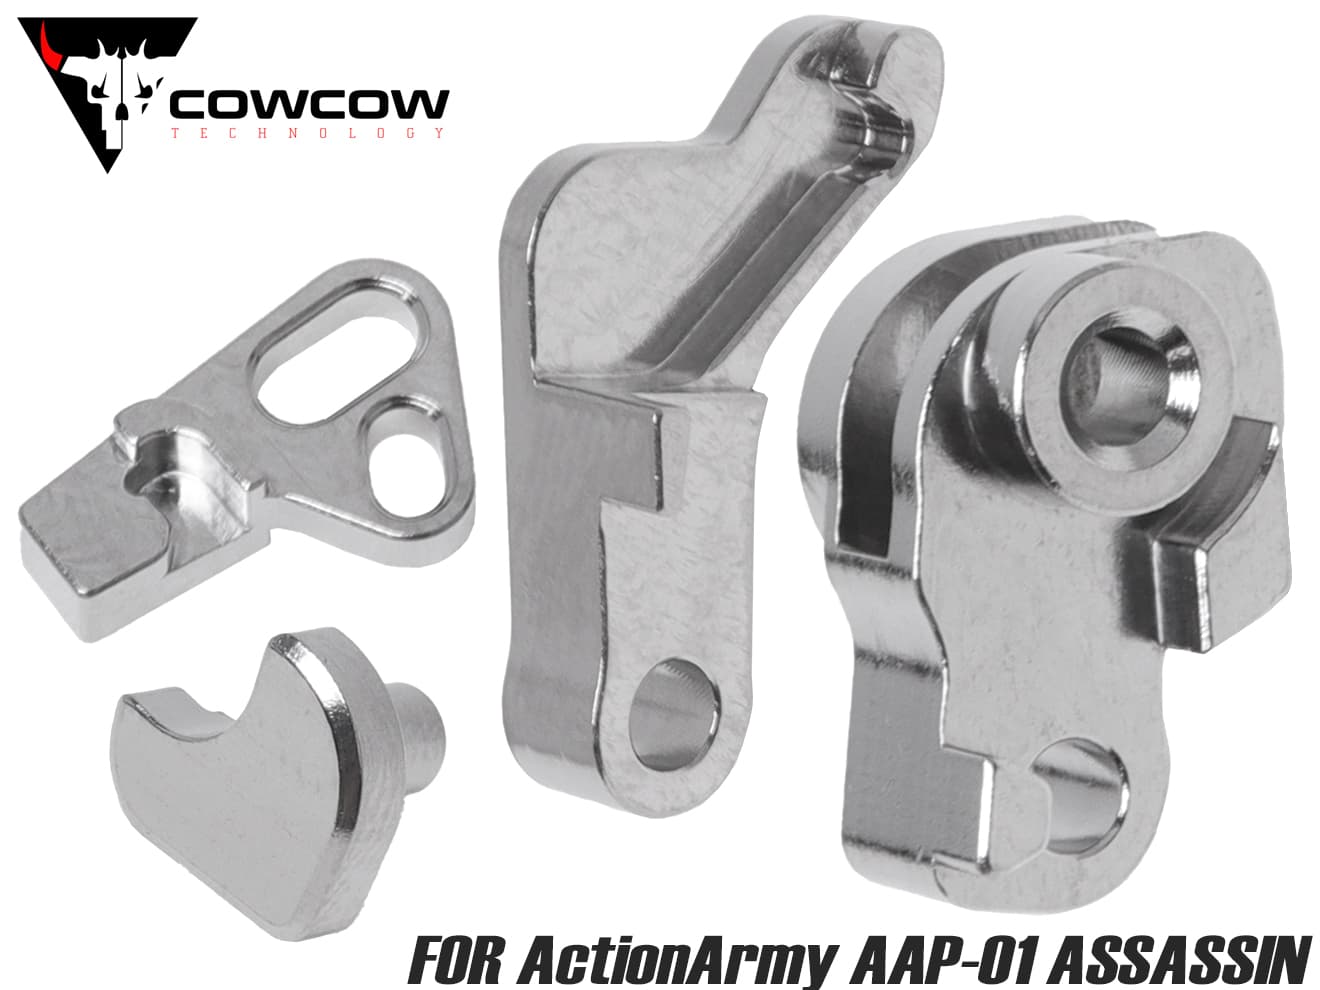 COWCOW TECHNOLOGY 強化ローディングノズルフルセット for ActionArmy 